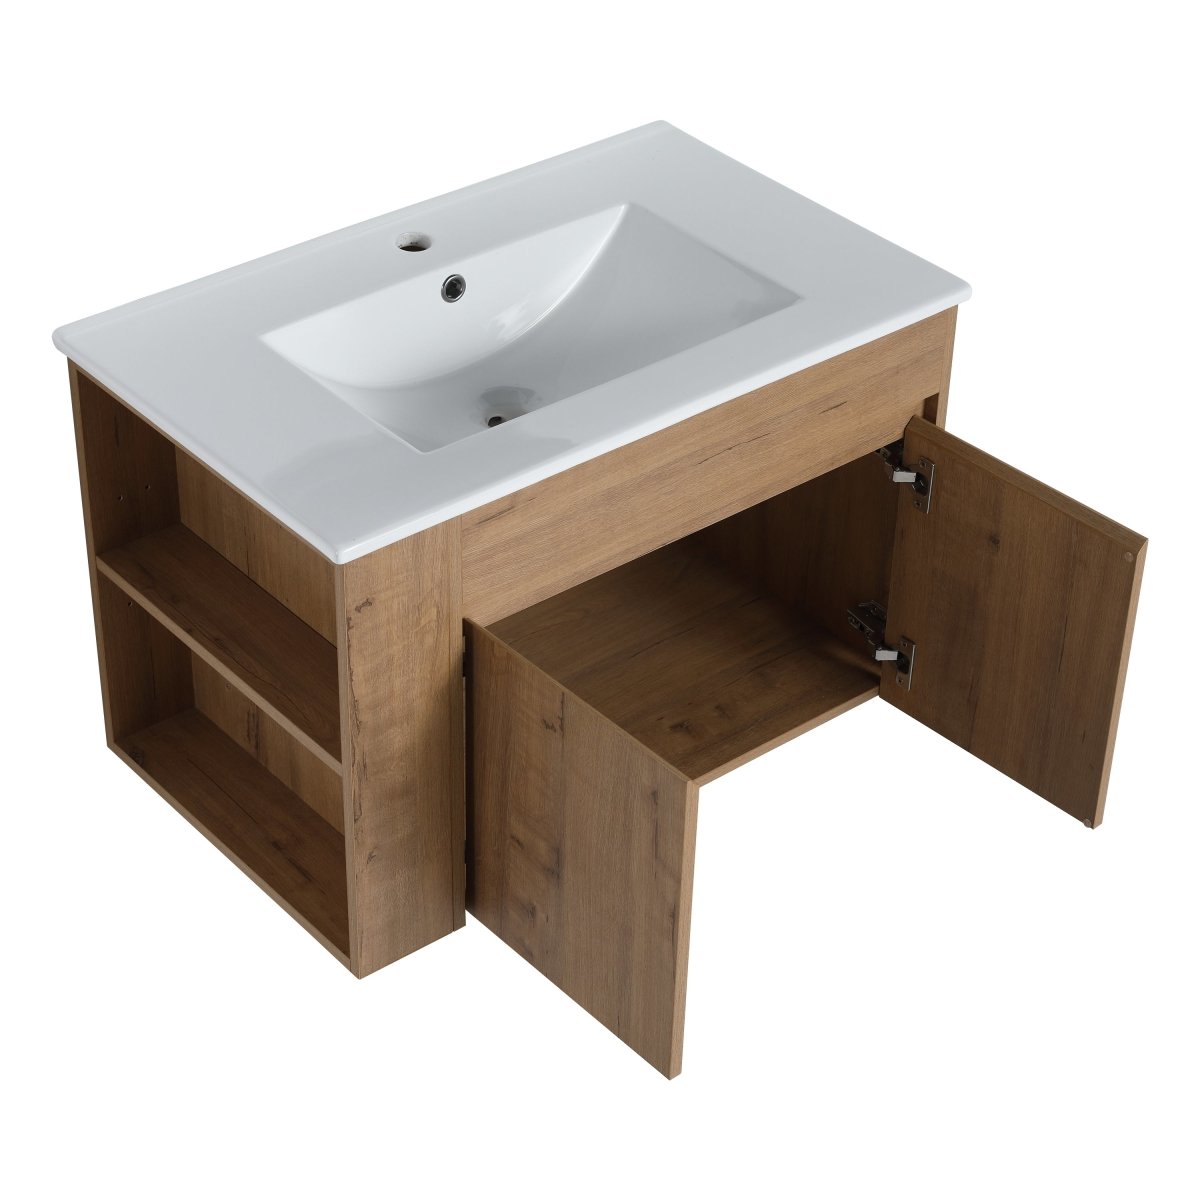 ExBrite 30" Wall Mount Floating Vanity with White Ceramic Basin and Adjust Open Shelf